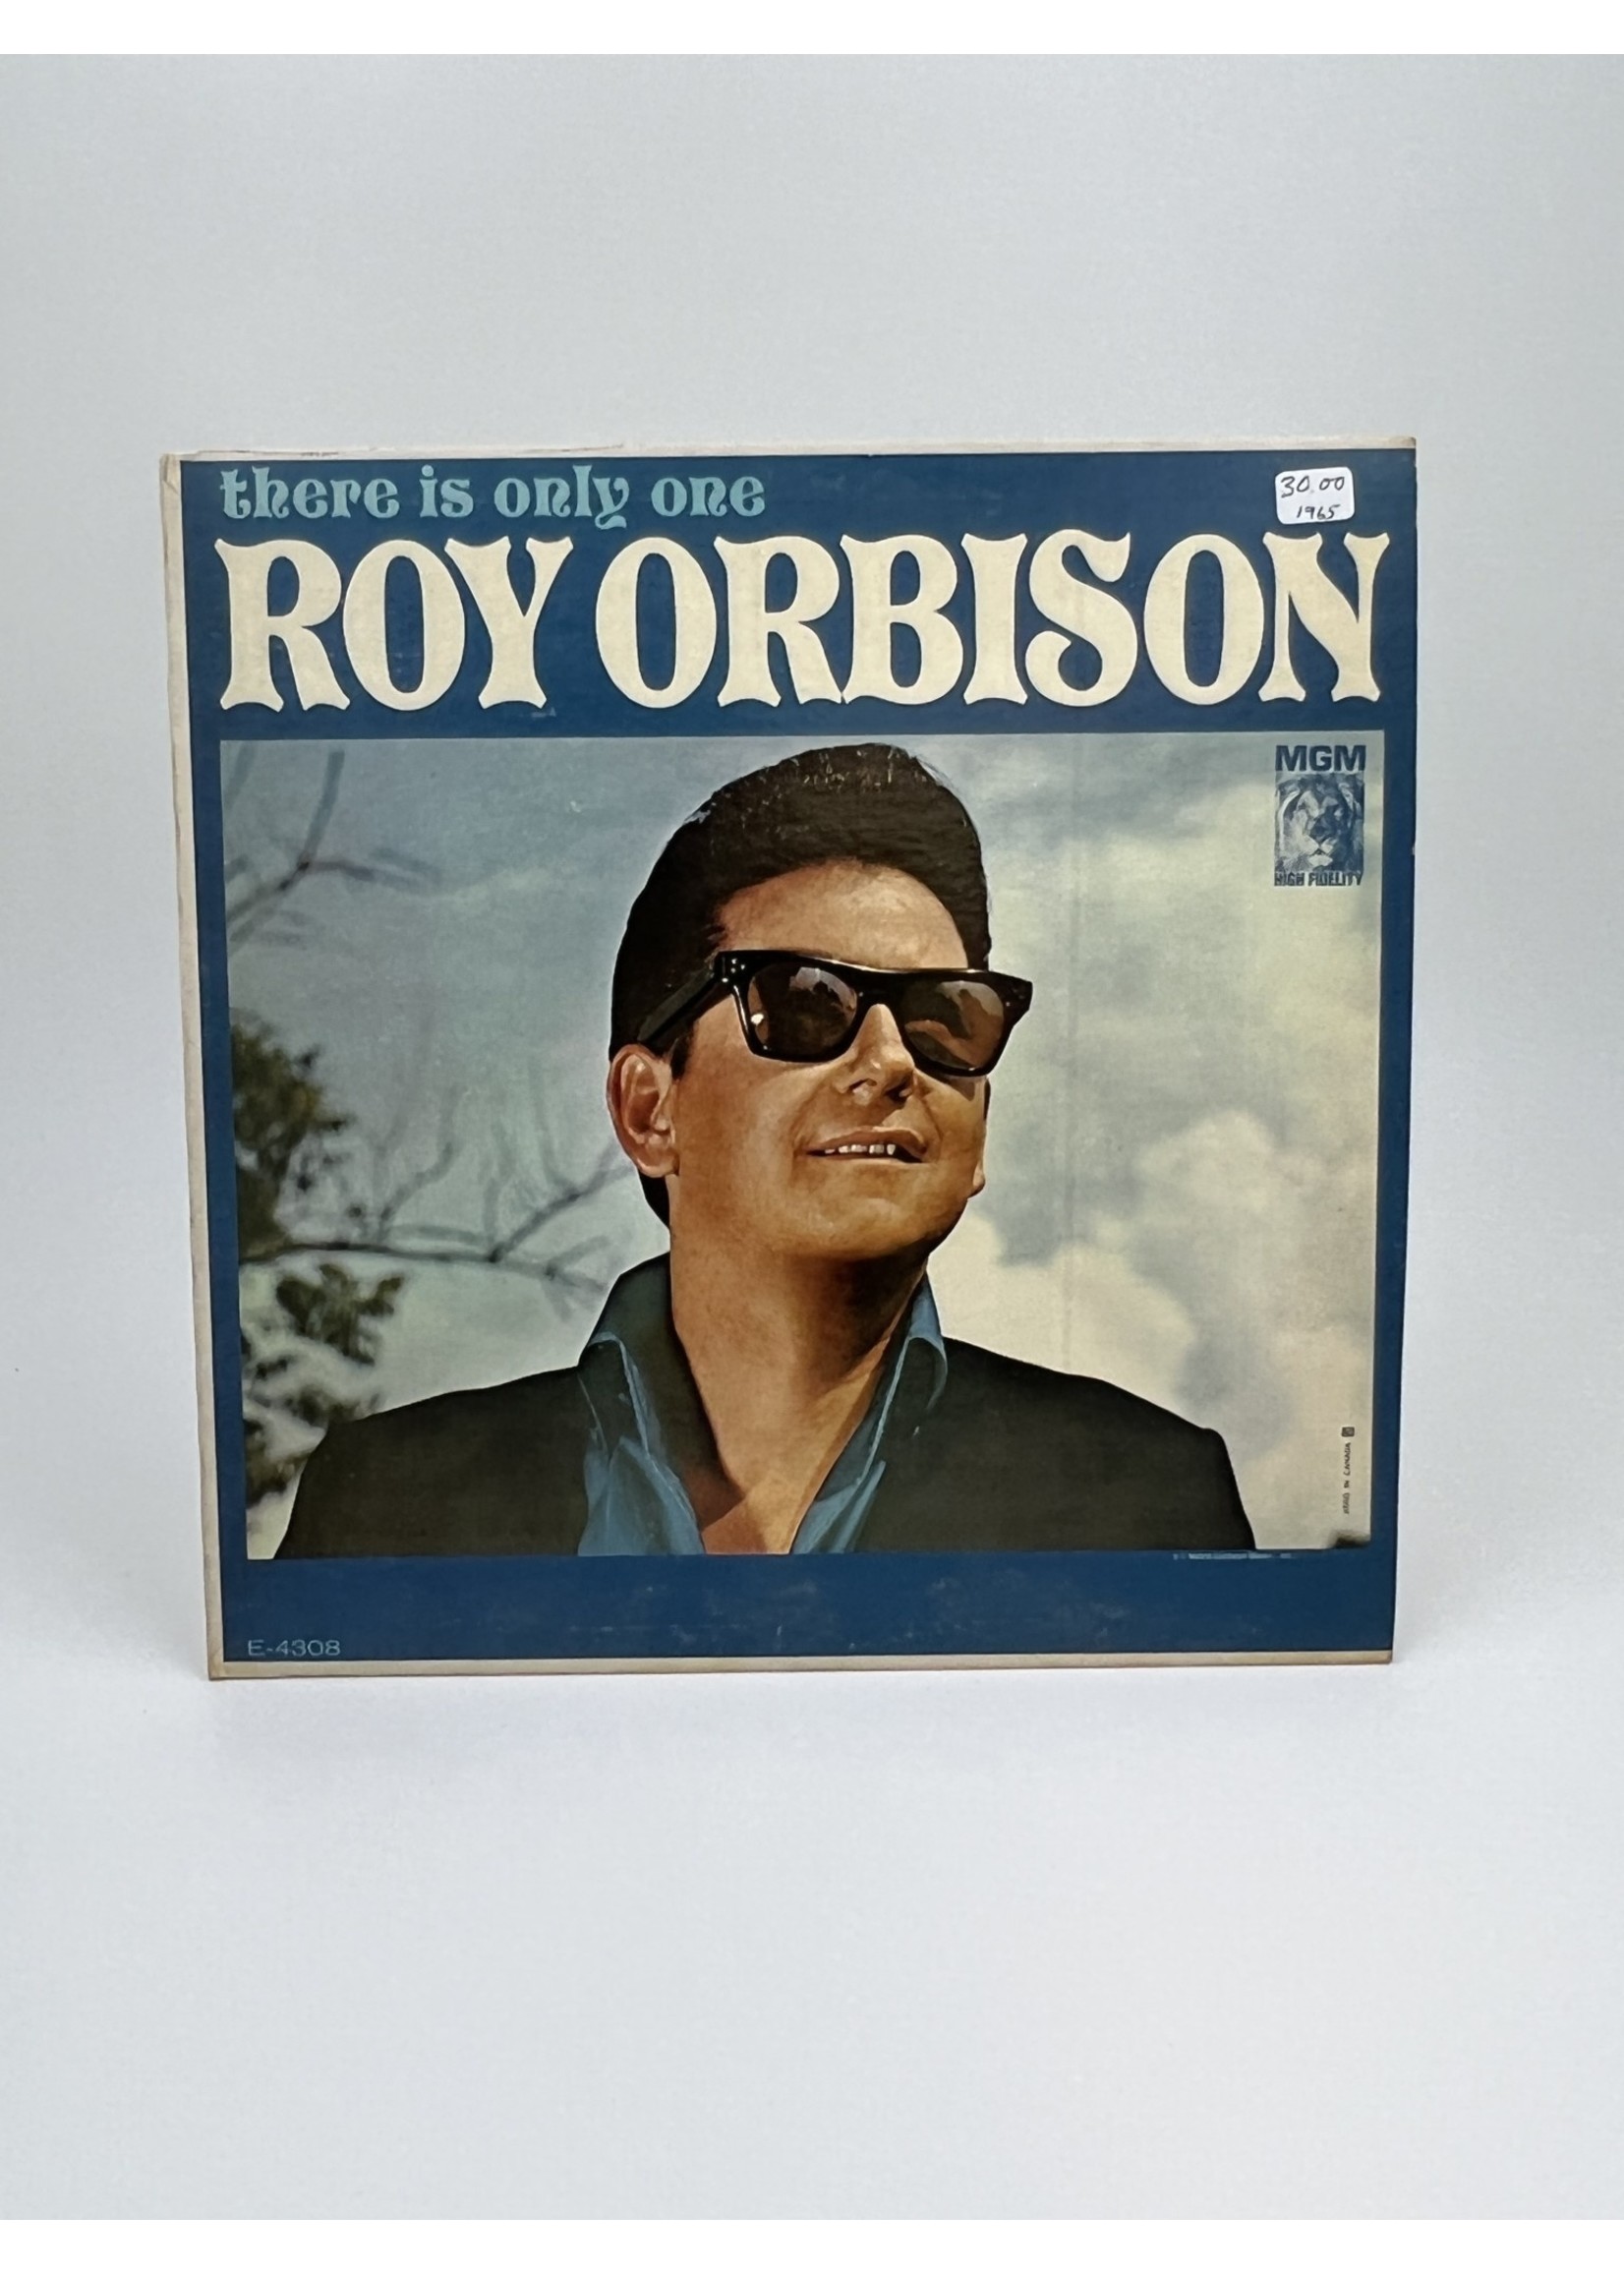 LP Roy Orbison There Is Only One LP Record